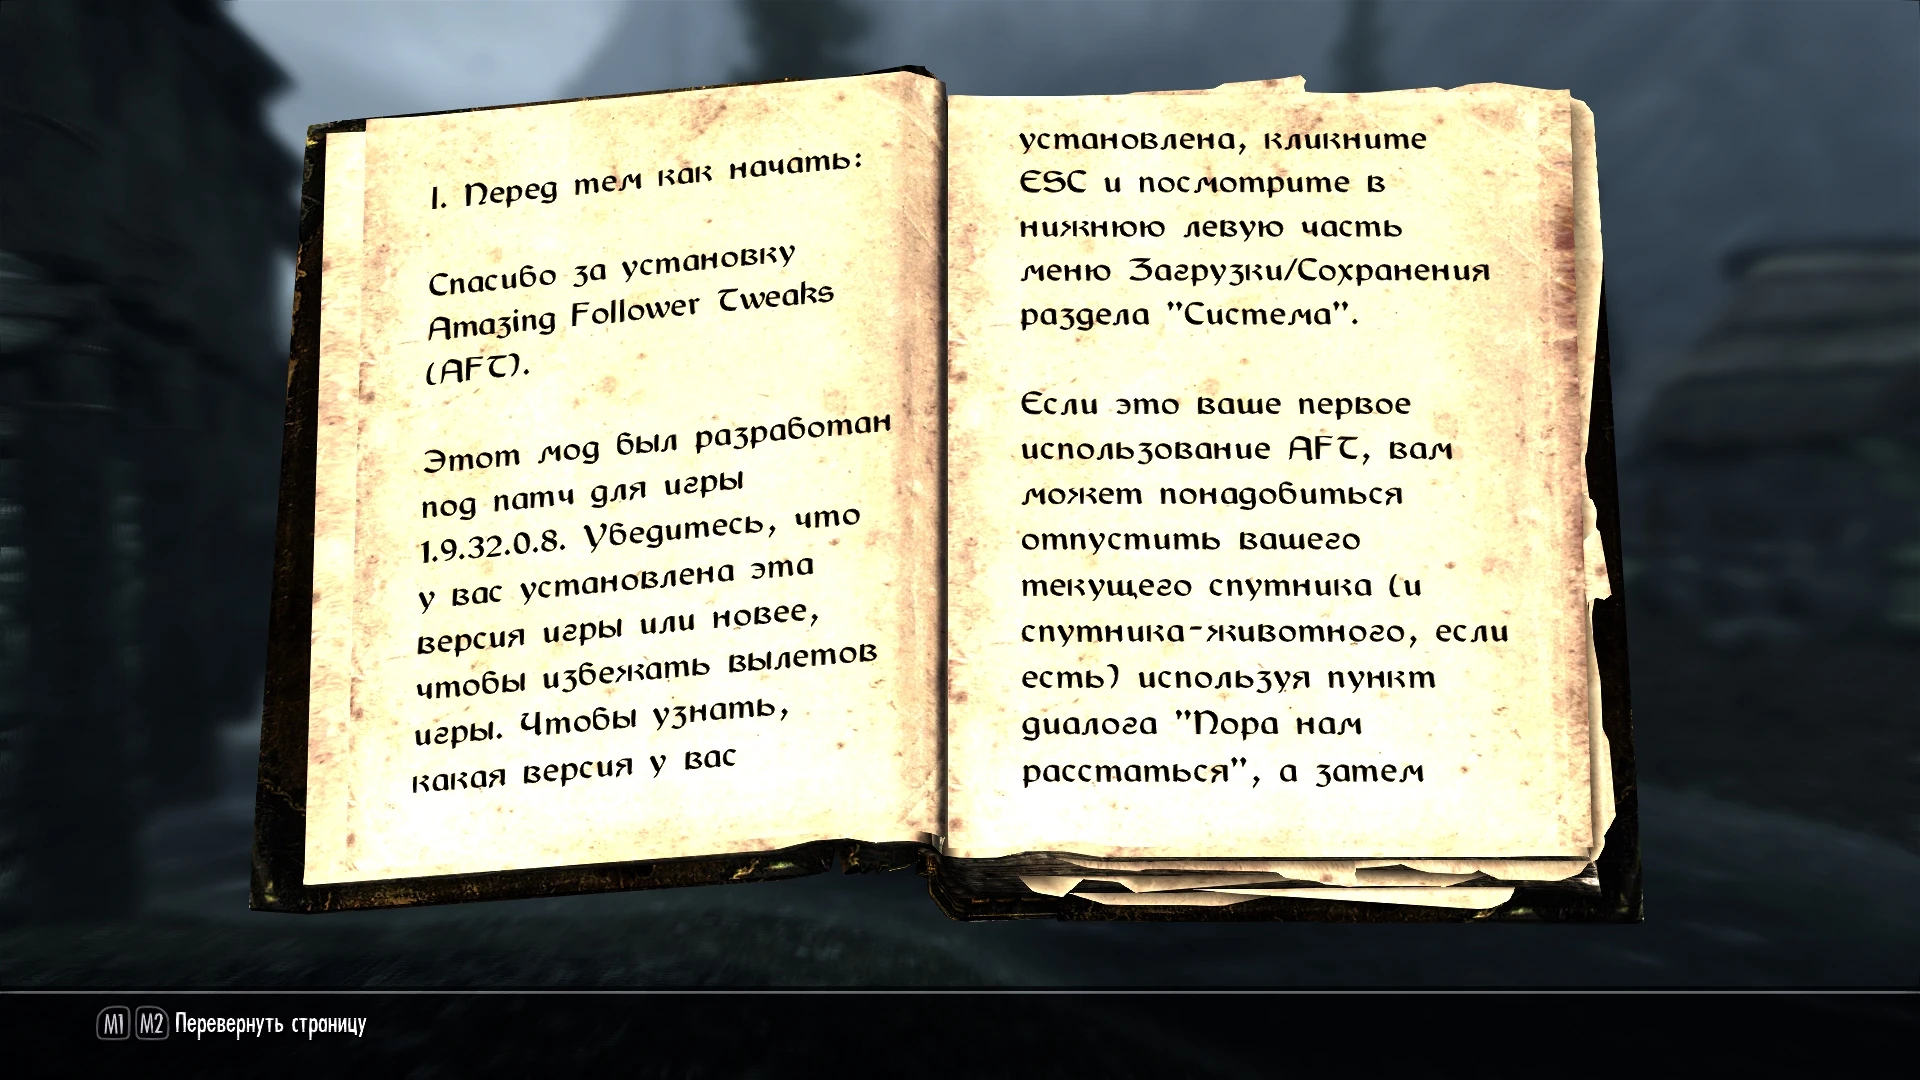 how to translate skyrim from russian to english